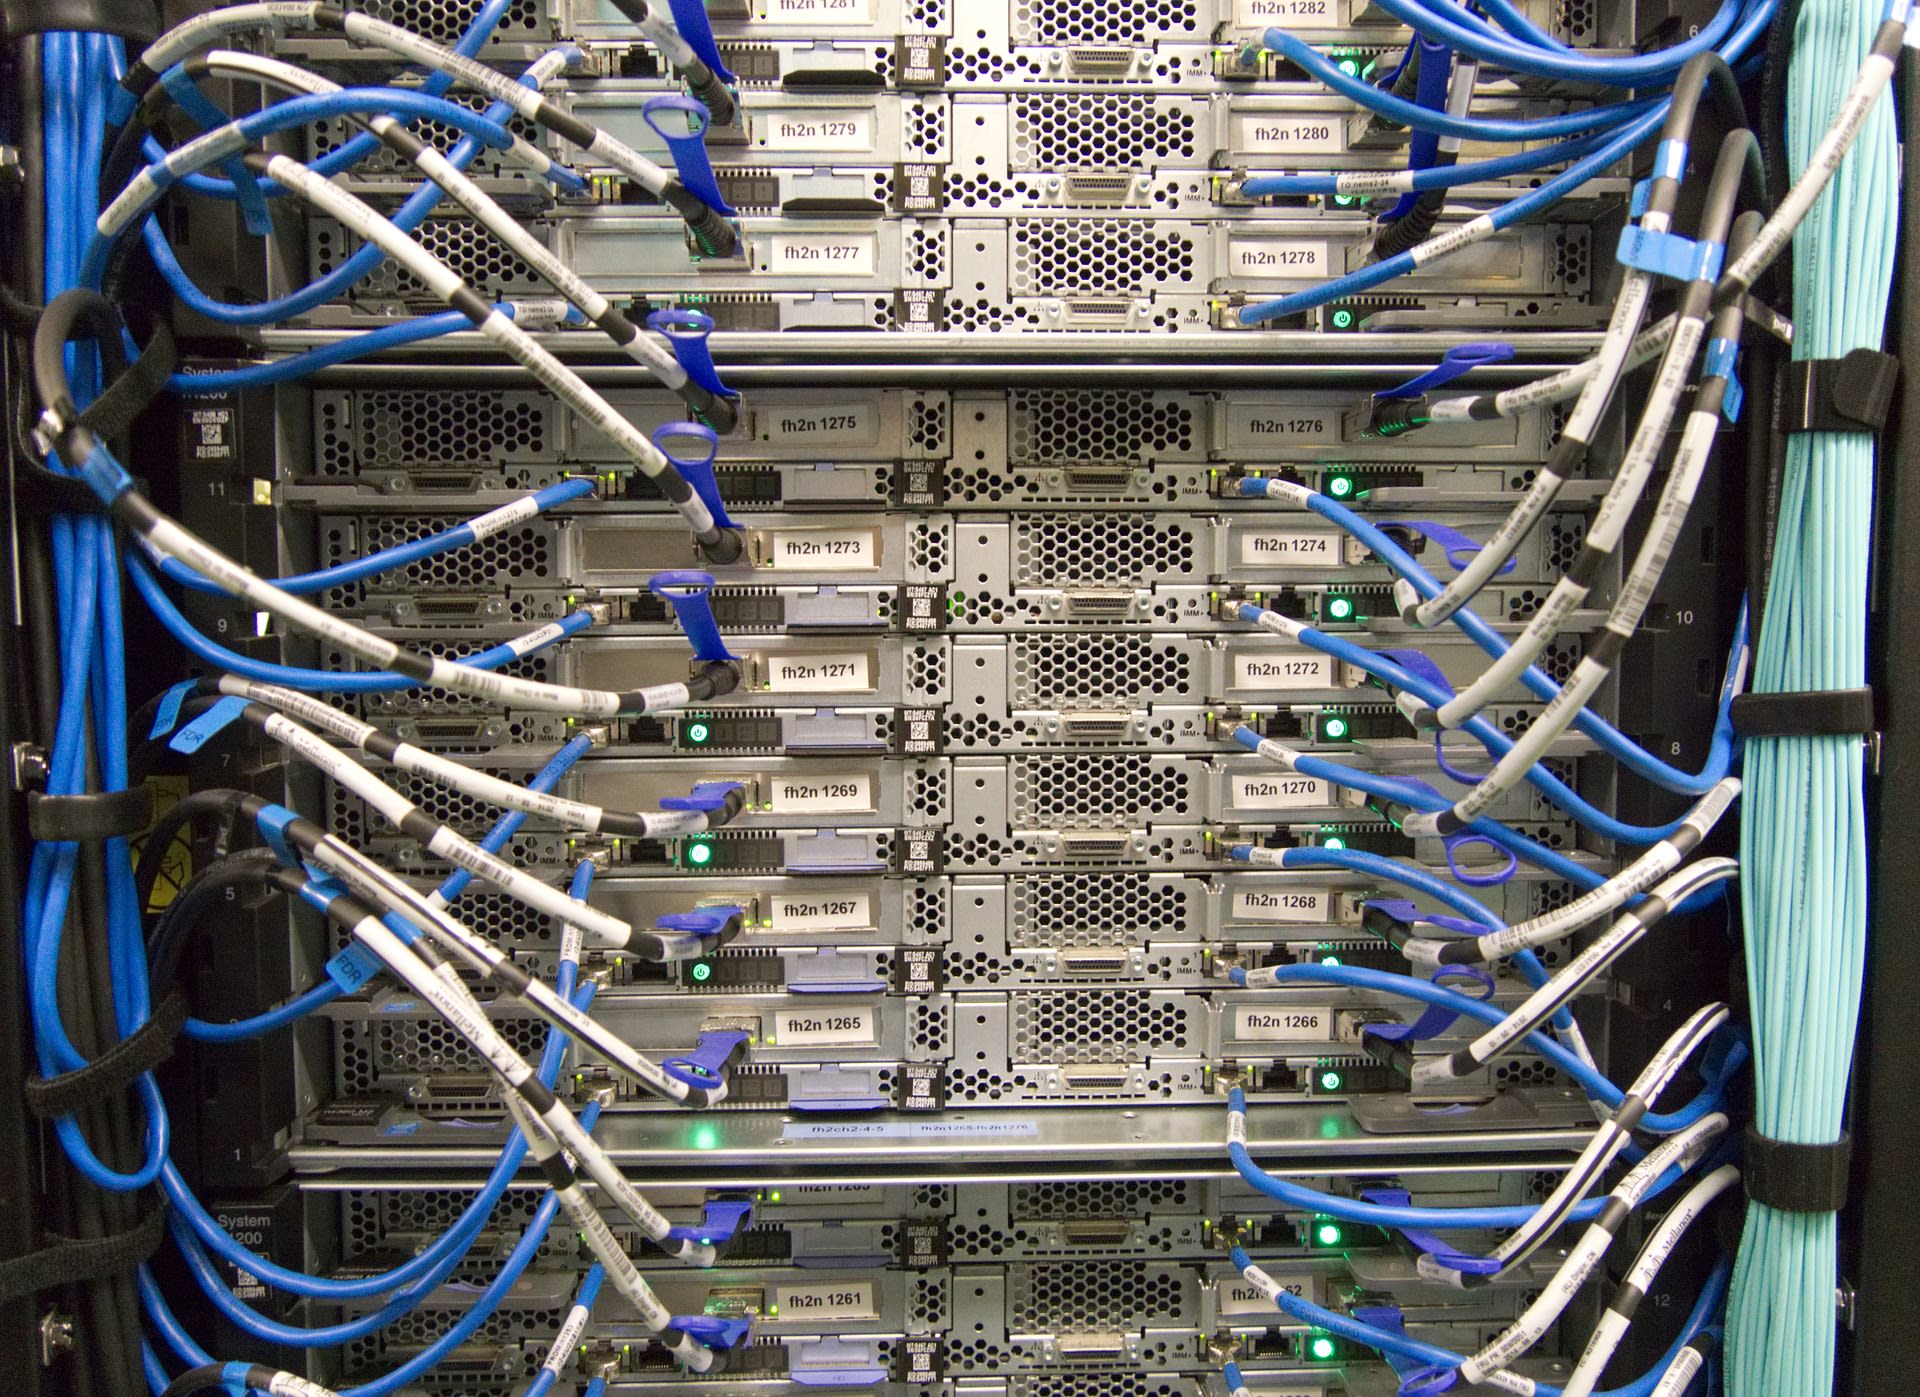 Cable Management Best Practices: Easy Tips for Optimizing Your Data Center